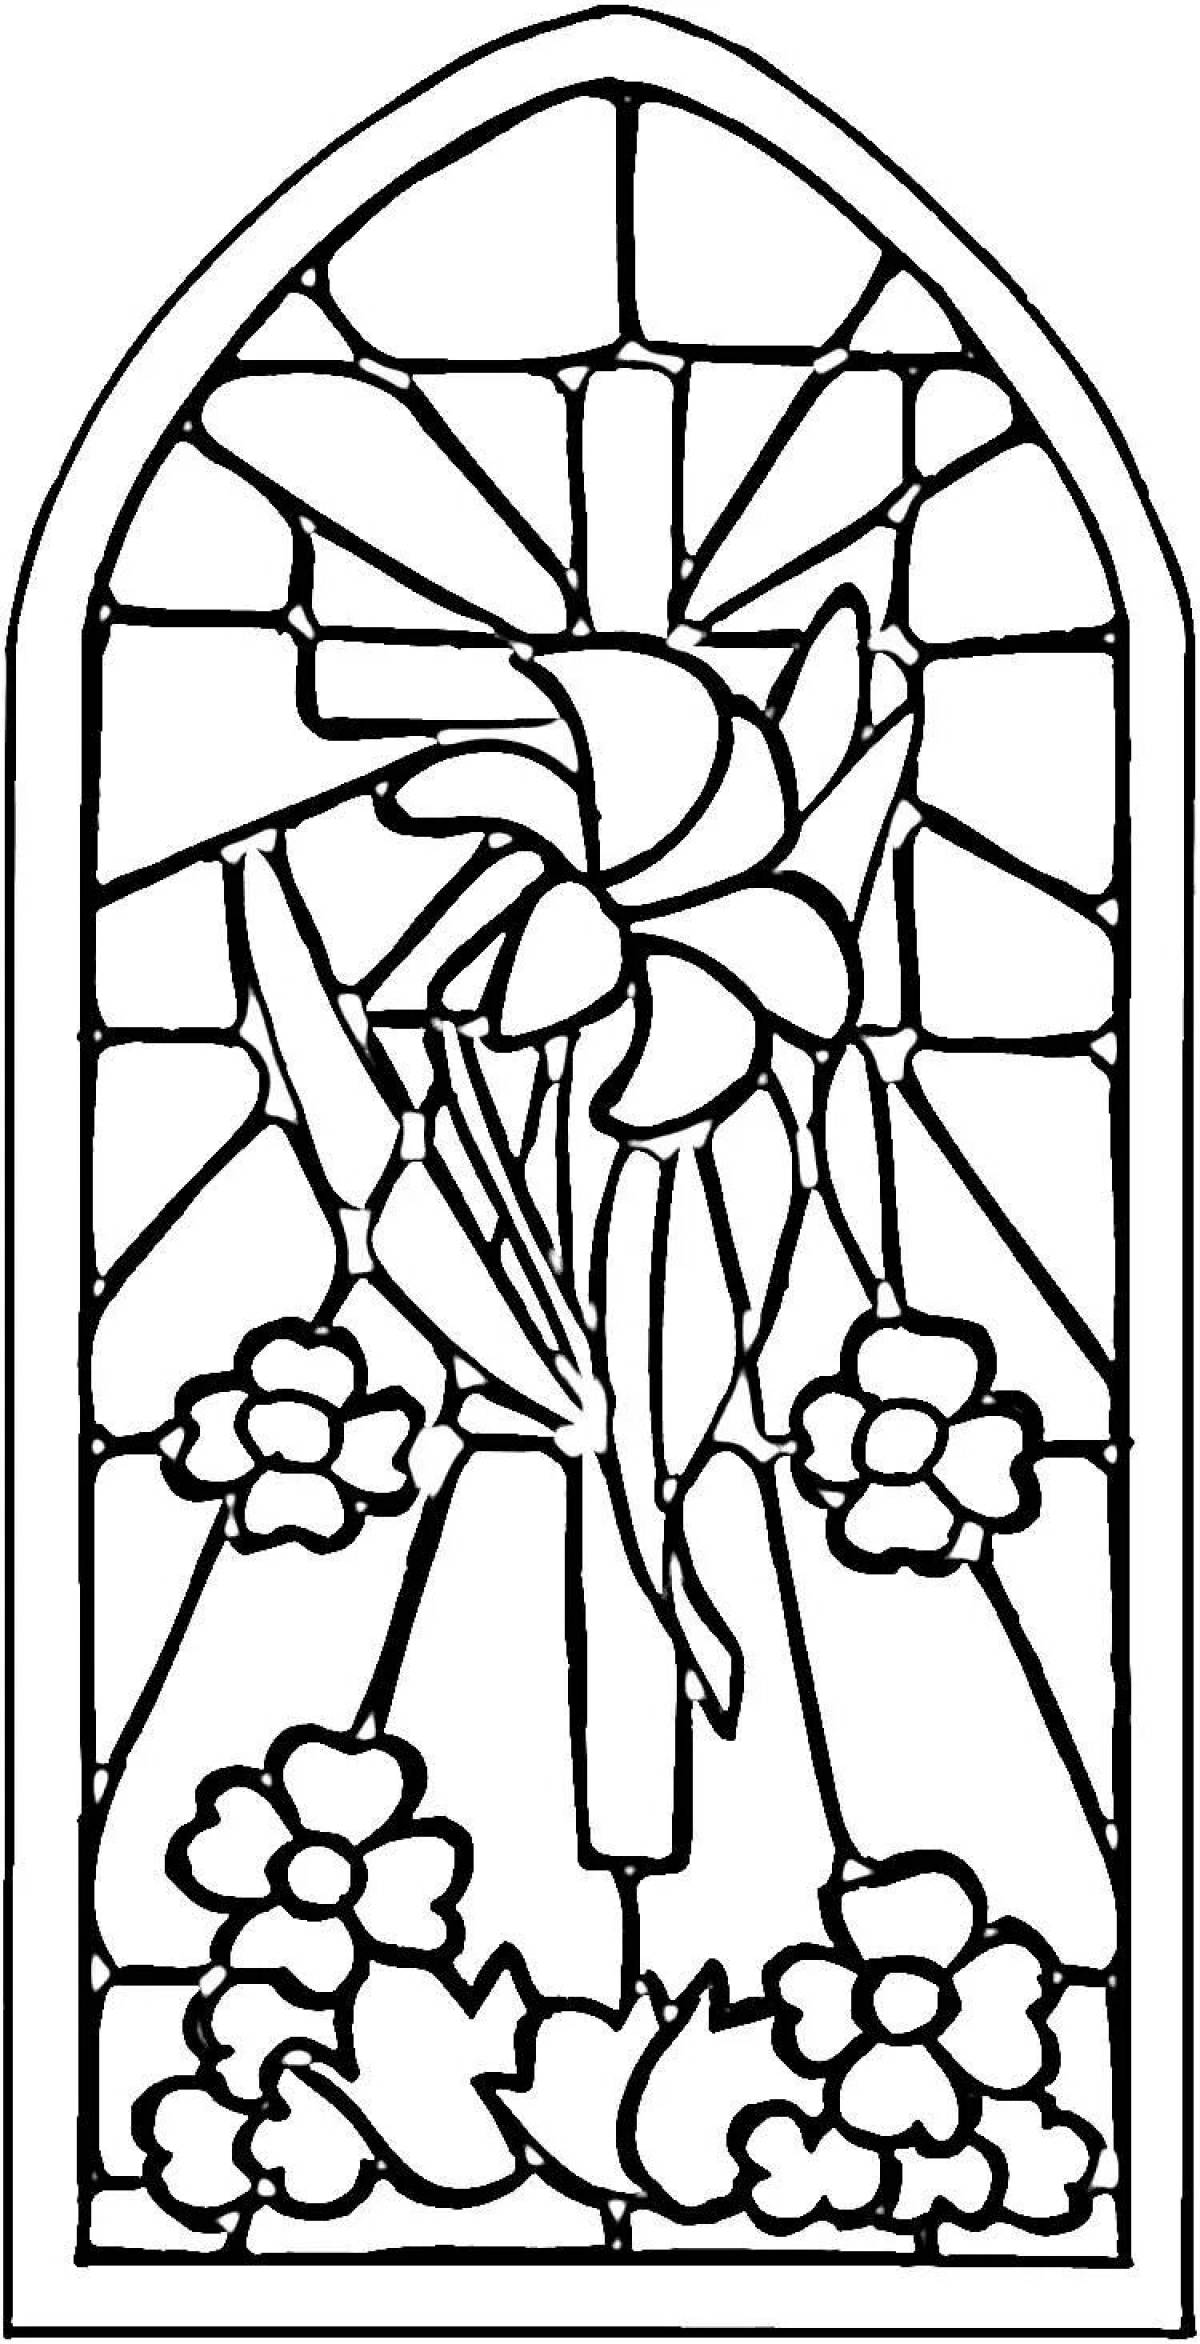 Stained glass windows #4